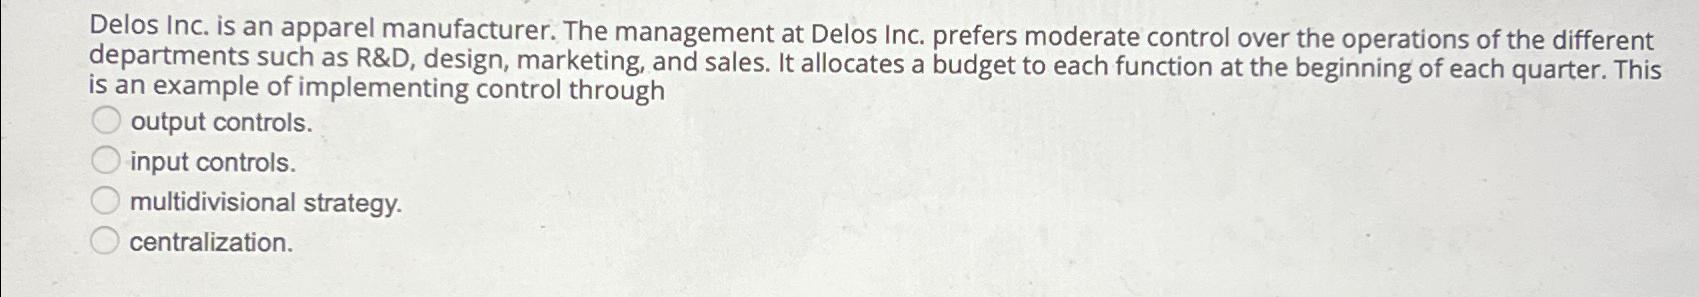 Solved Delos Inc. is an apparel manufacturer. The management